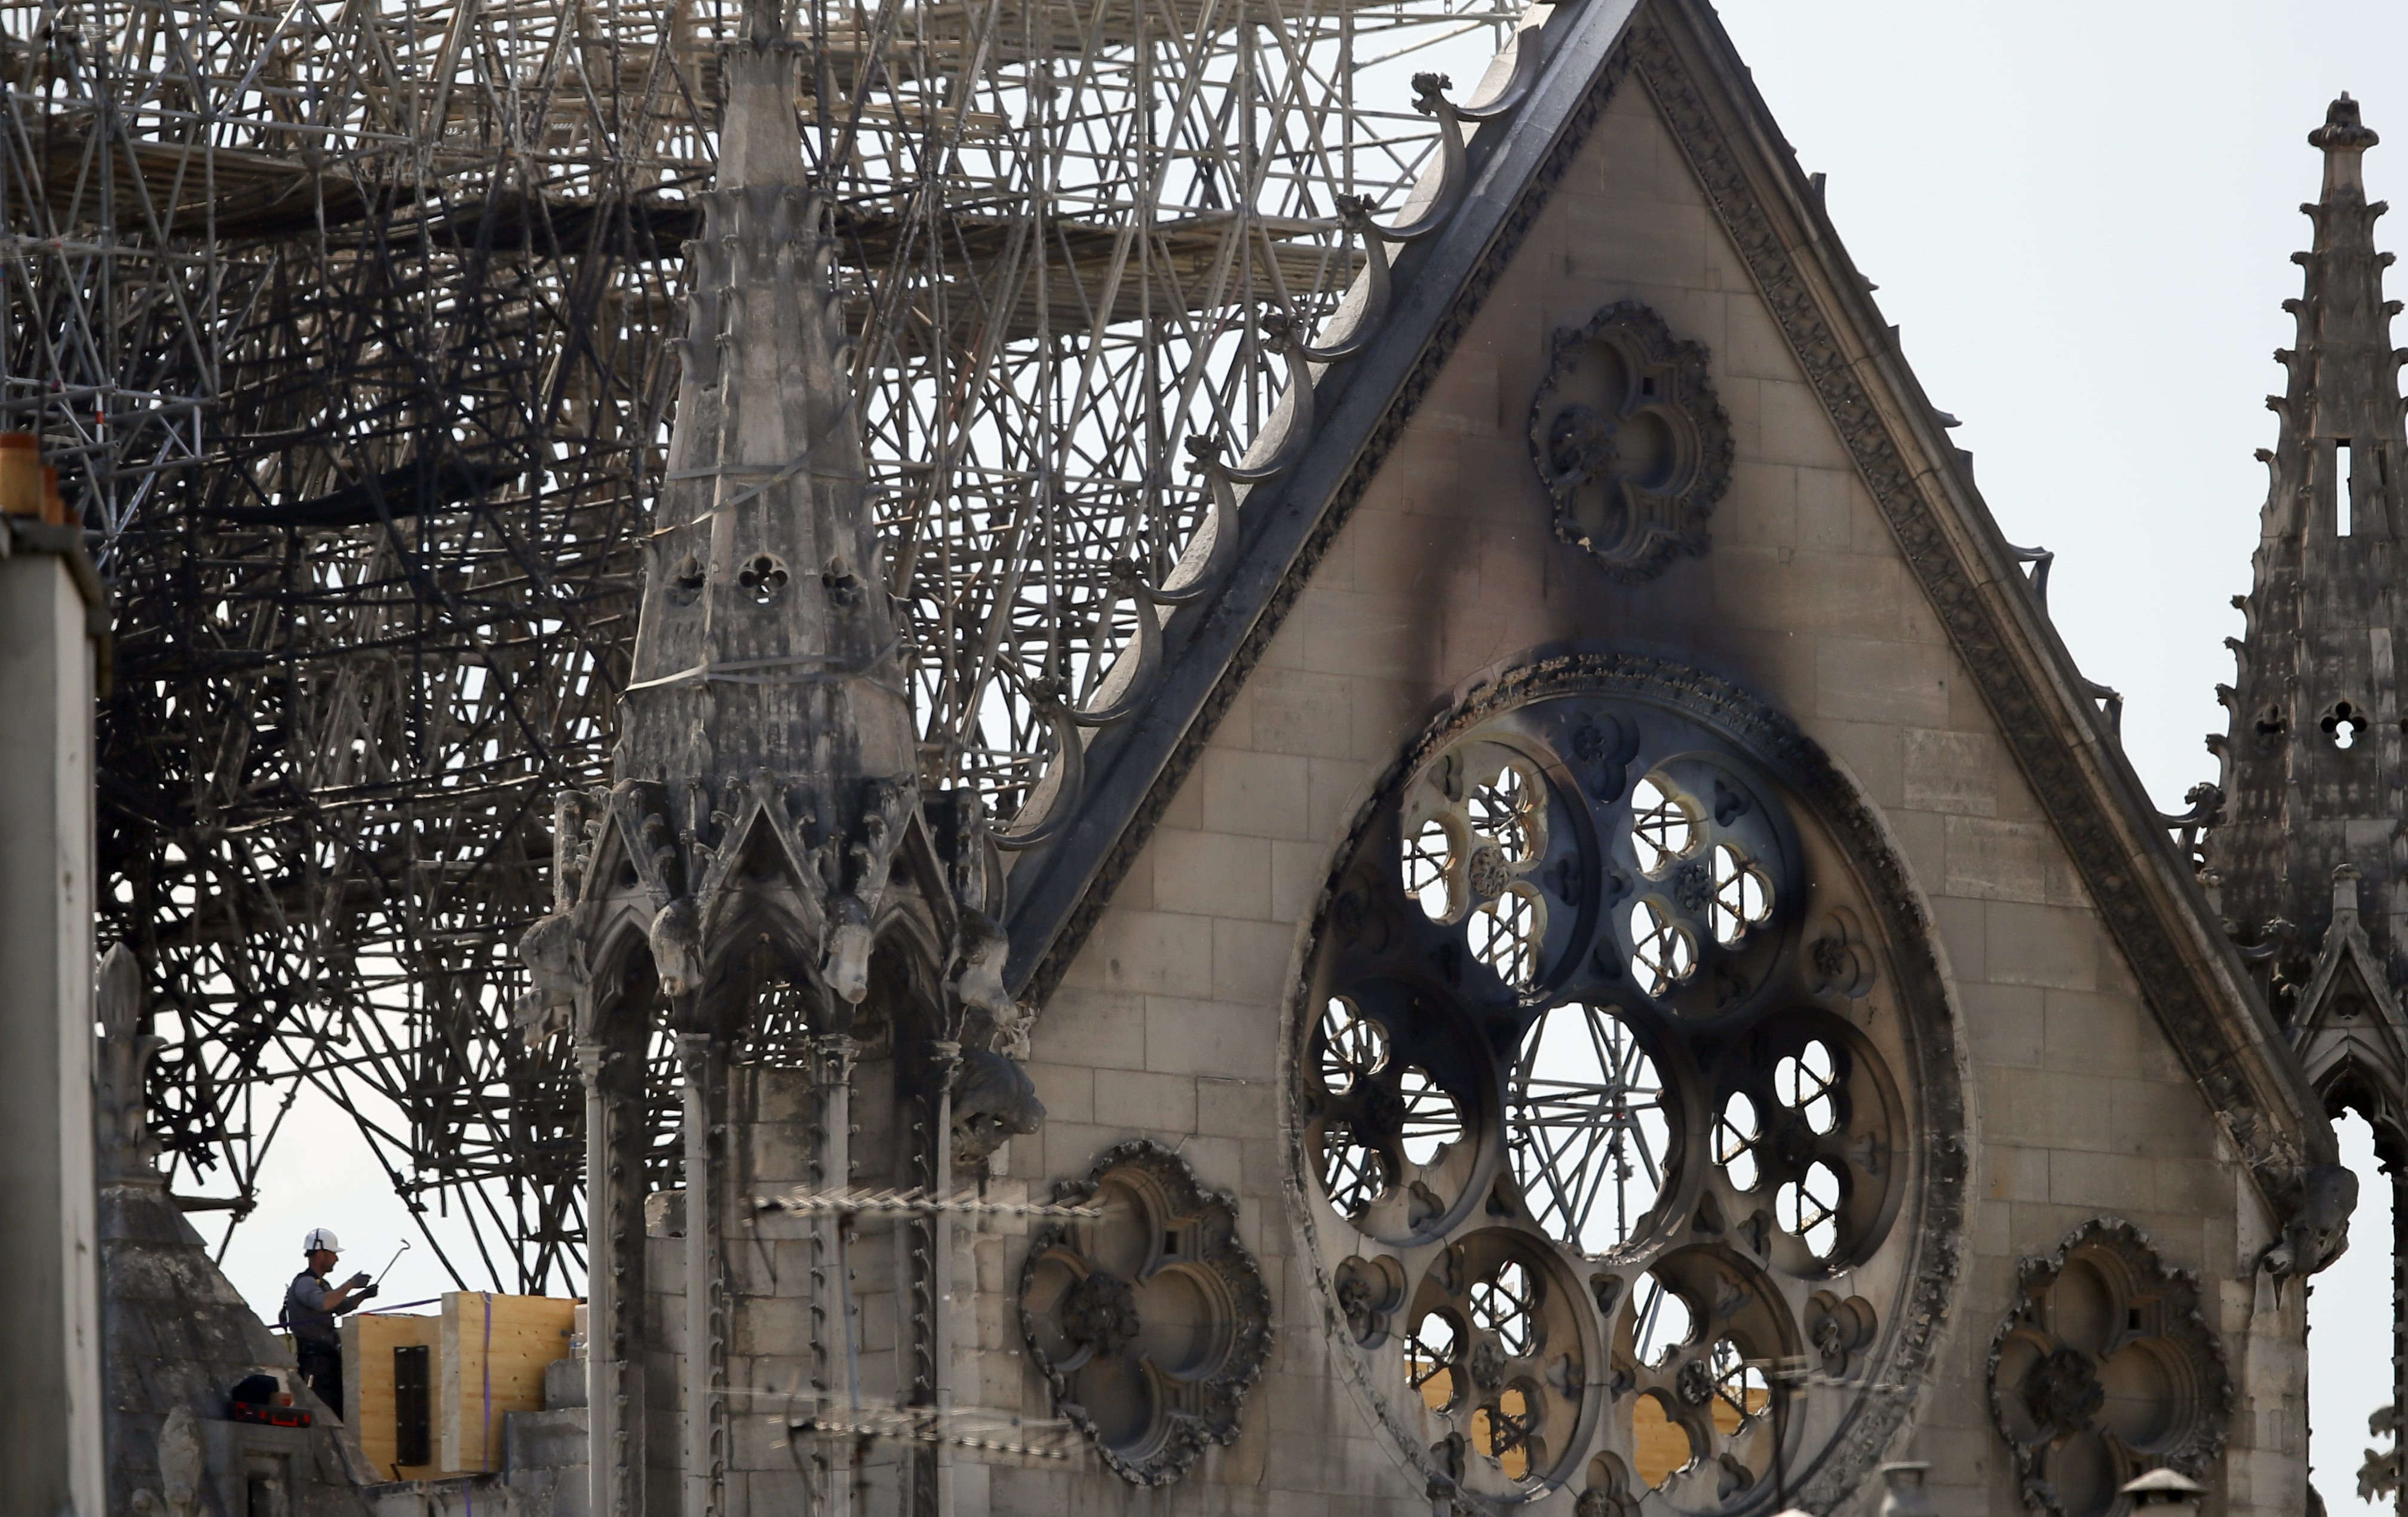 A worker checks on a wooden support structure placed on the Notre Dame Cathedral in Paris, Wednesday, April 17, 2019. Nearly $1 billion has already poured in from ordinary worshippers and high-powered magnates around the world to restore Notre Dame Cathedral in Paris after a massive fire.